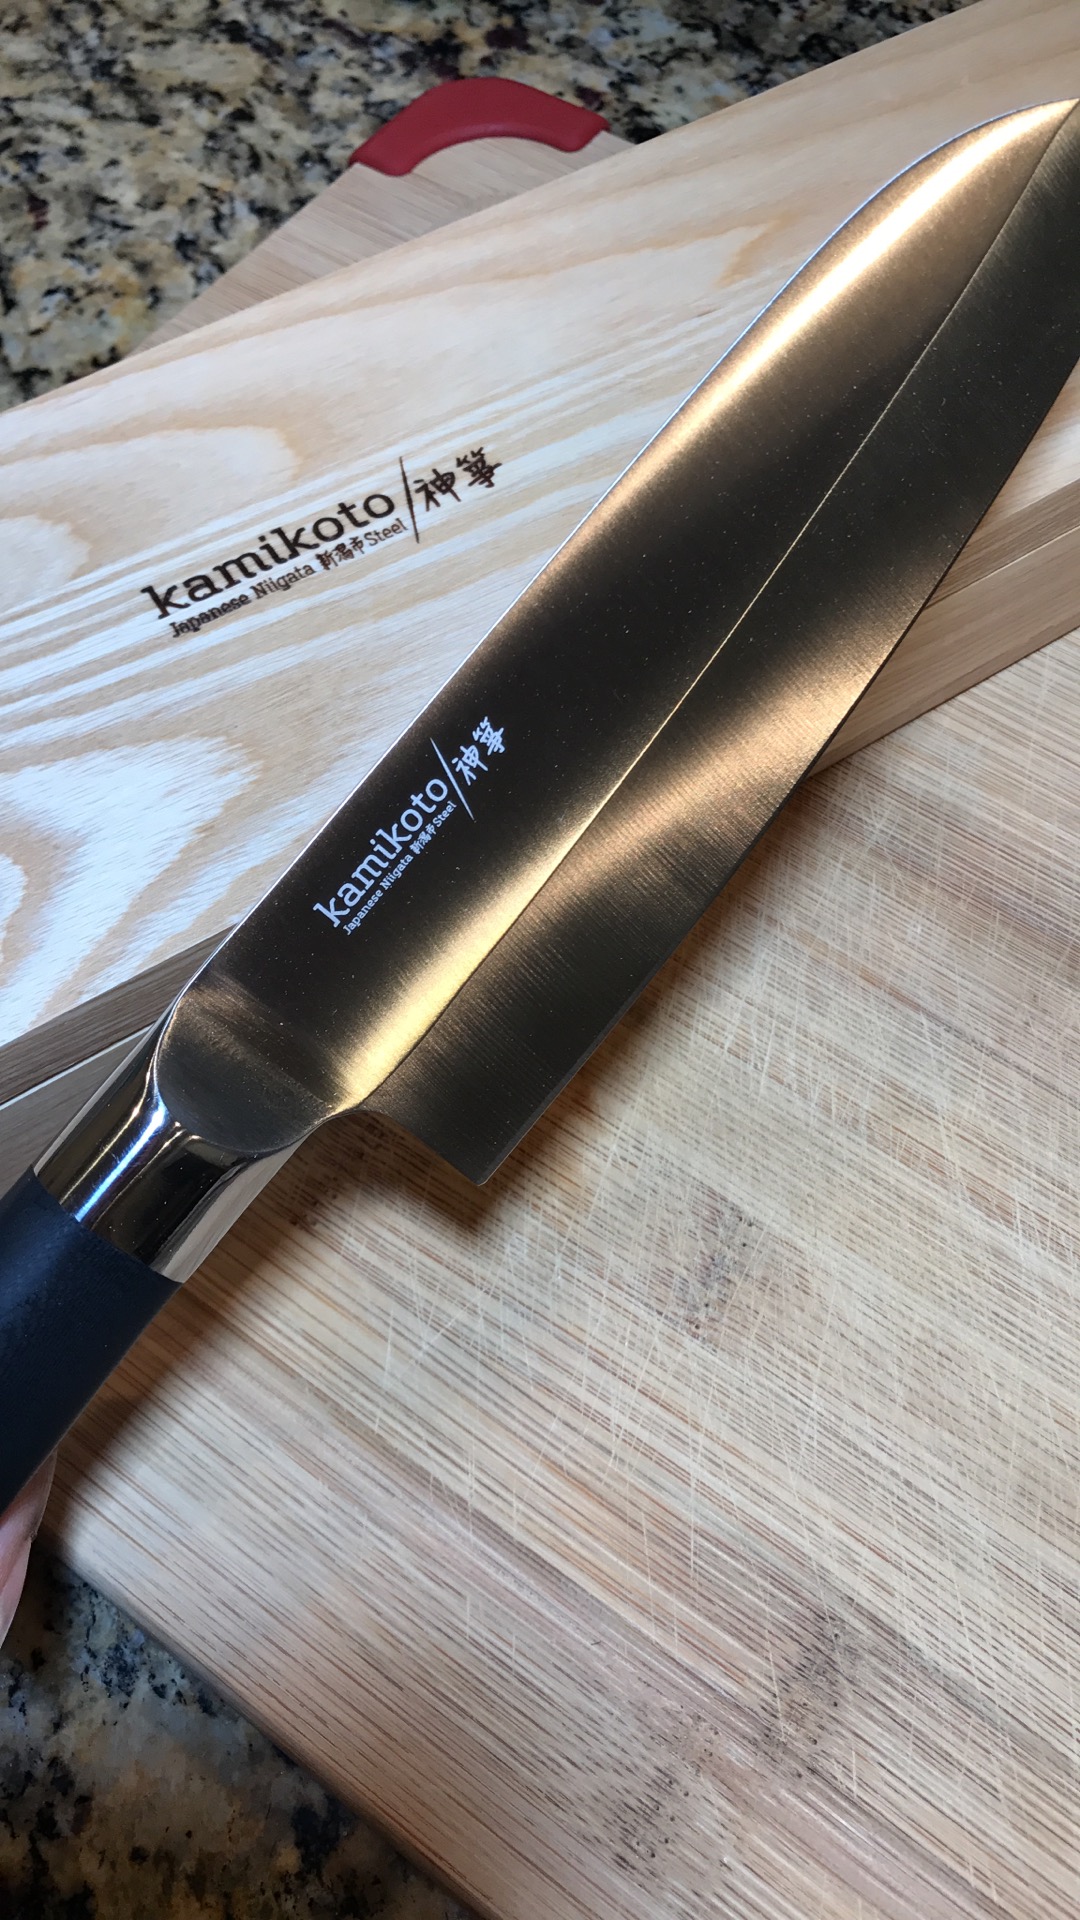 Kamikoto Knife Review & Giveaway